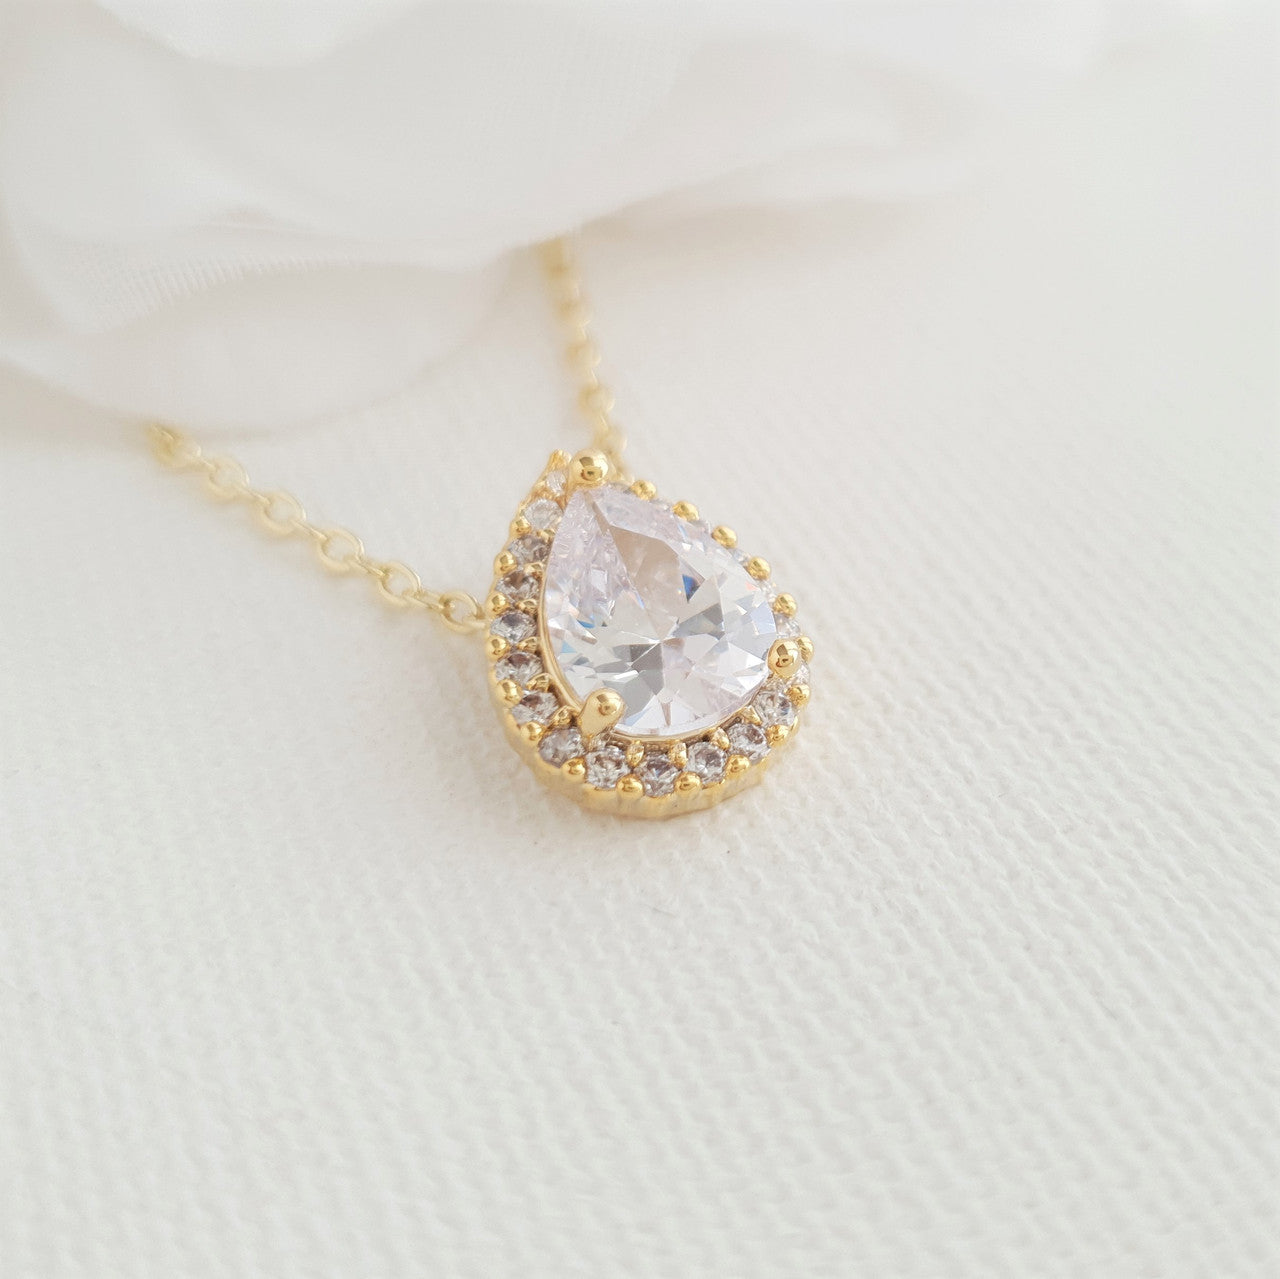 Gold Stud Earrings and Necklace for Bridesmaids-Emma